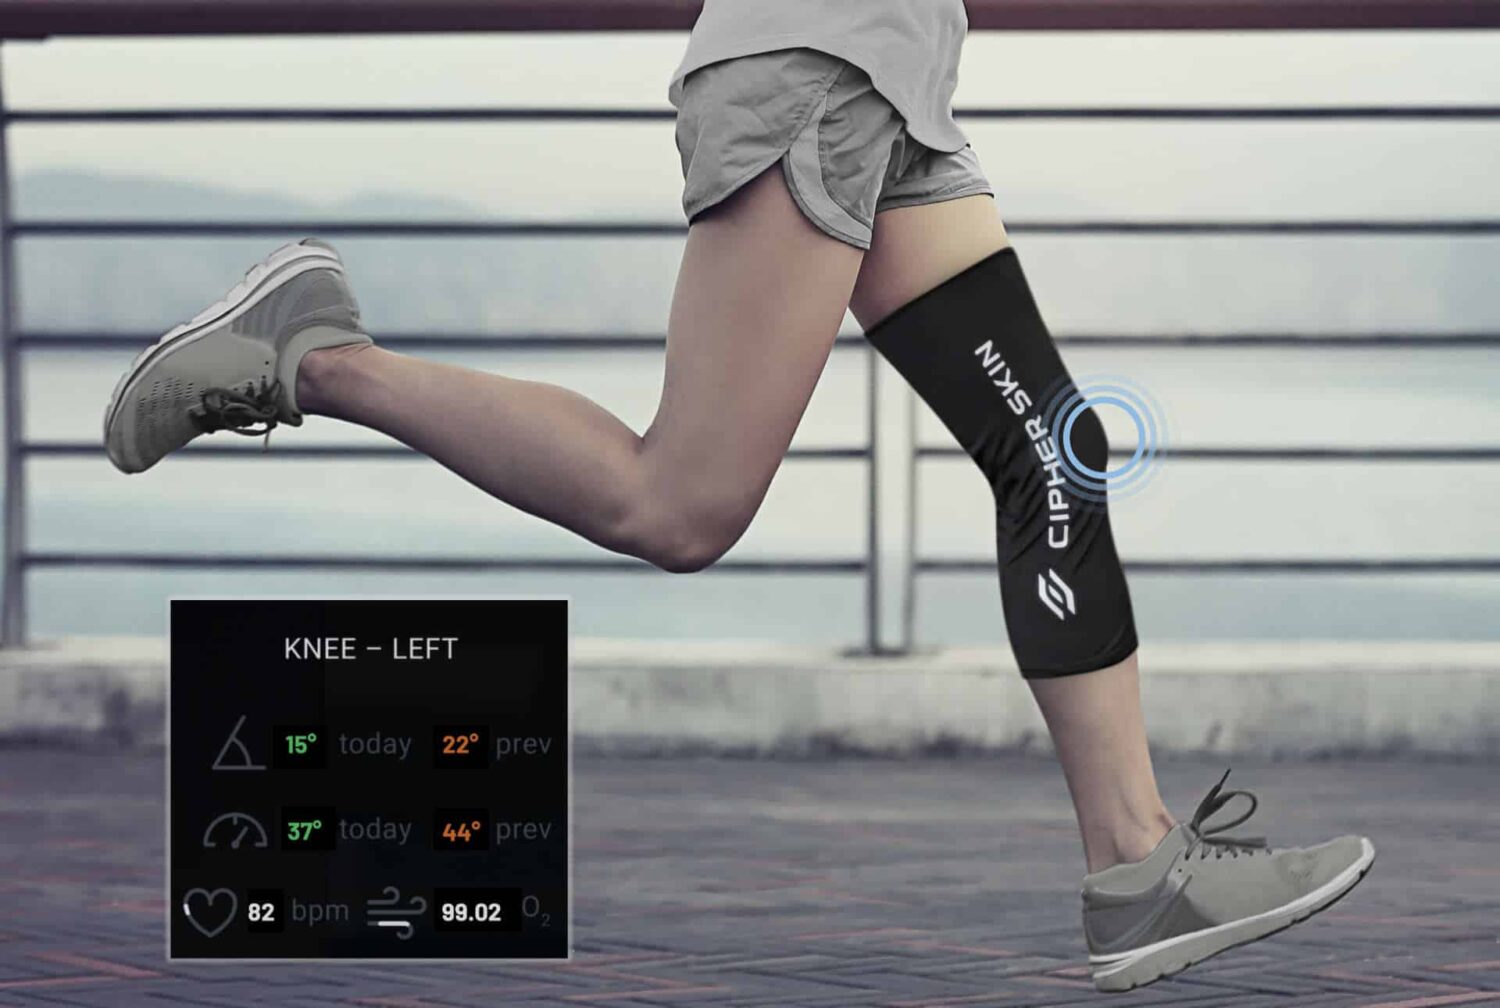 Cipher Skin Launches Pilot Program with Parker Health for Physical Therapy